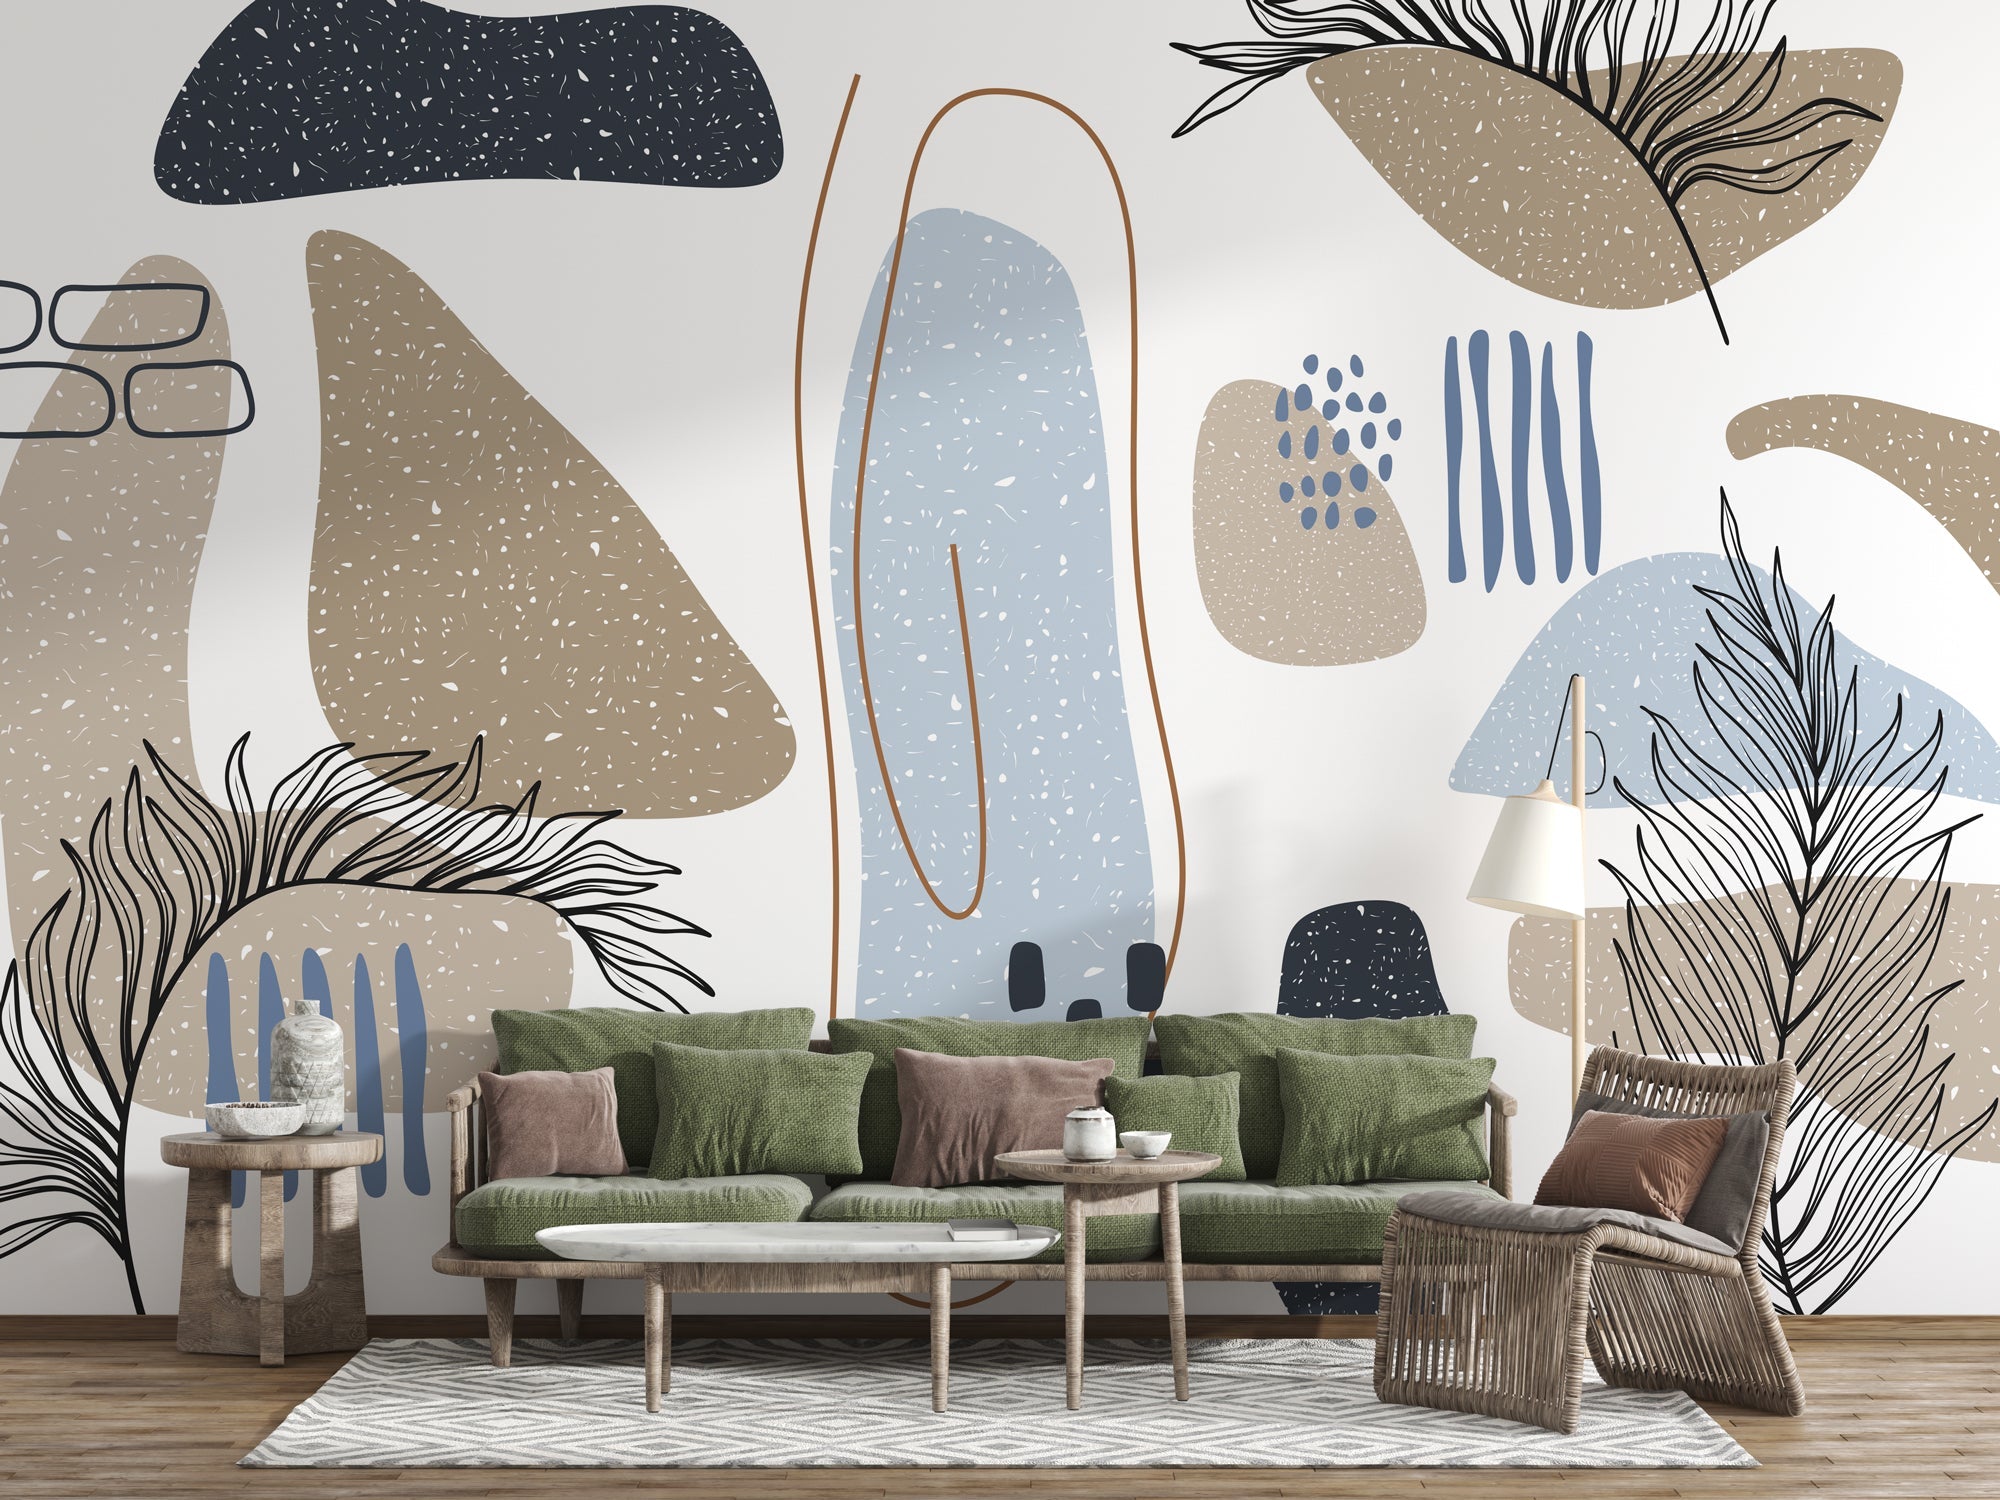 Boho Shapes Wallpaper Mural: Transform Your Space